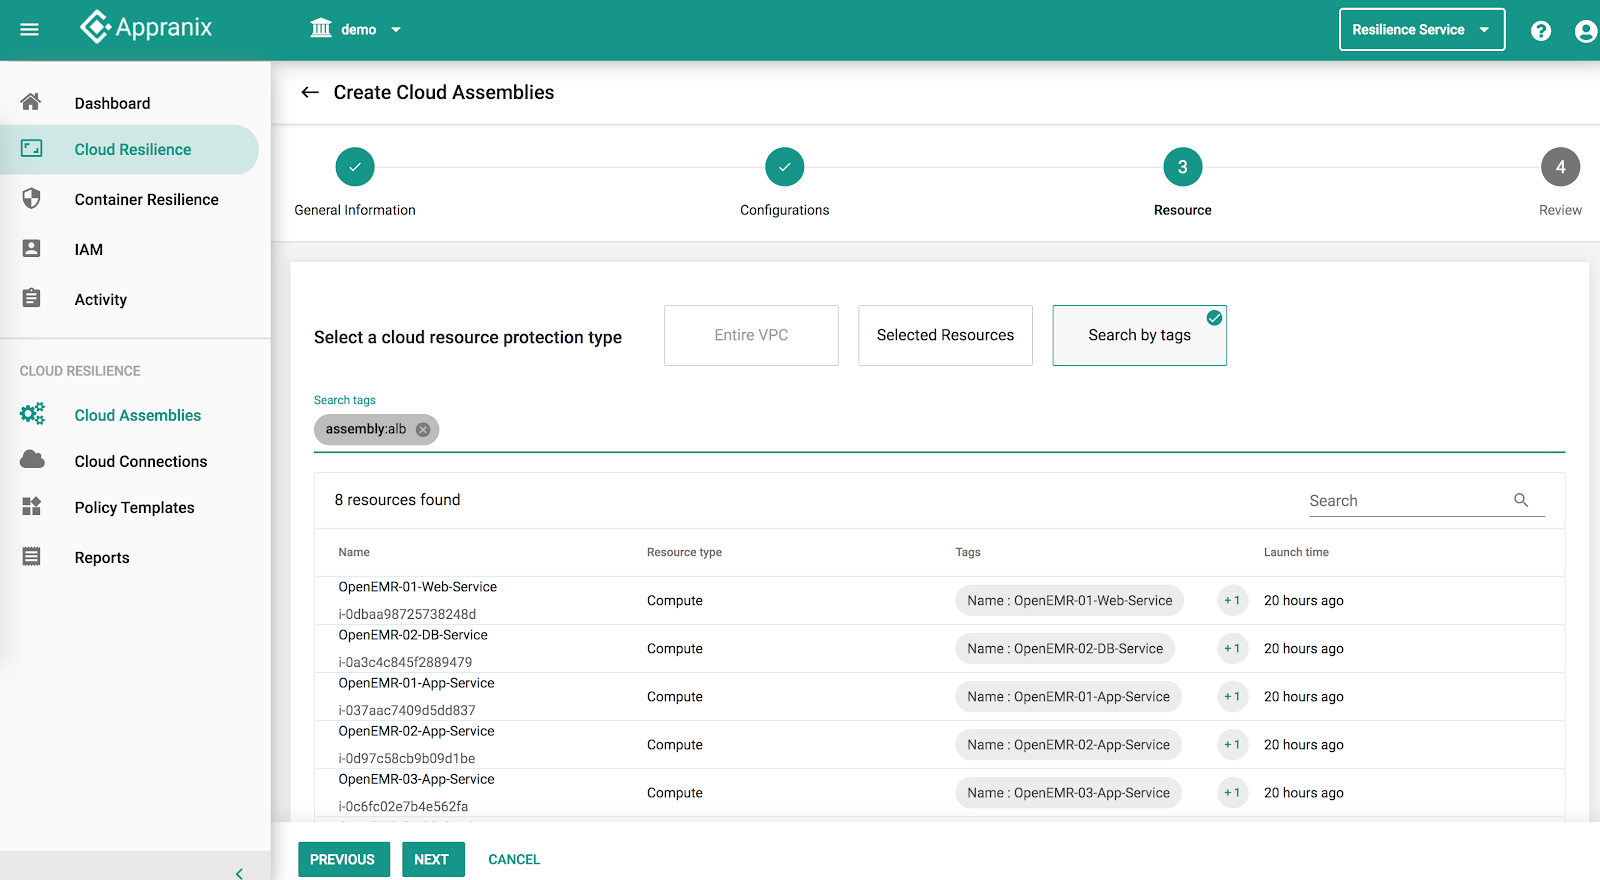 Automating policy-based protection further with cloud tags